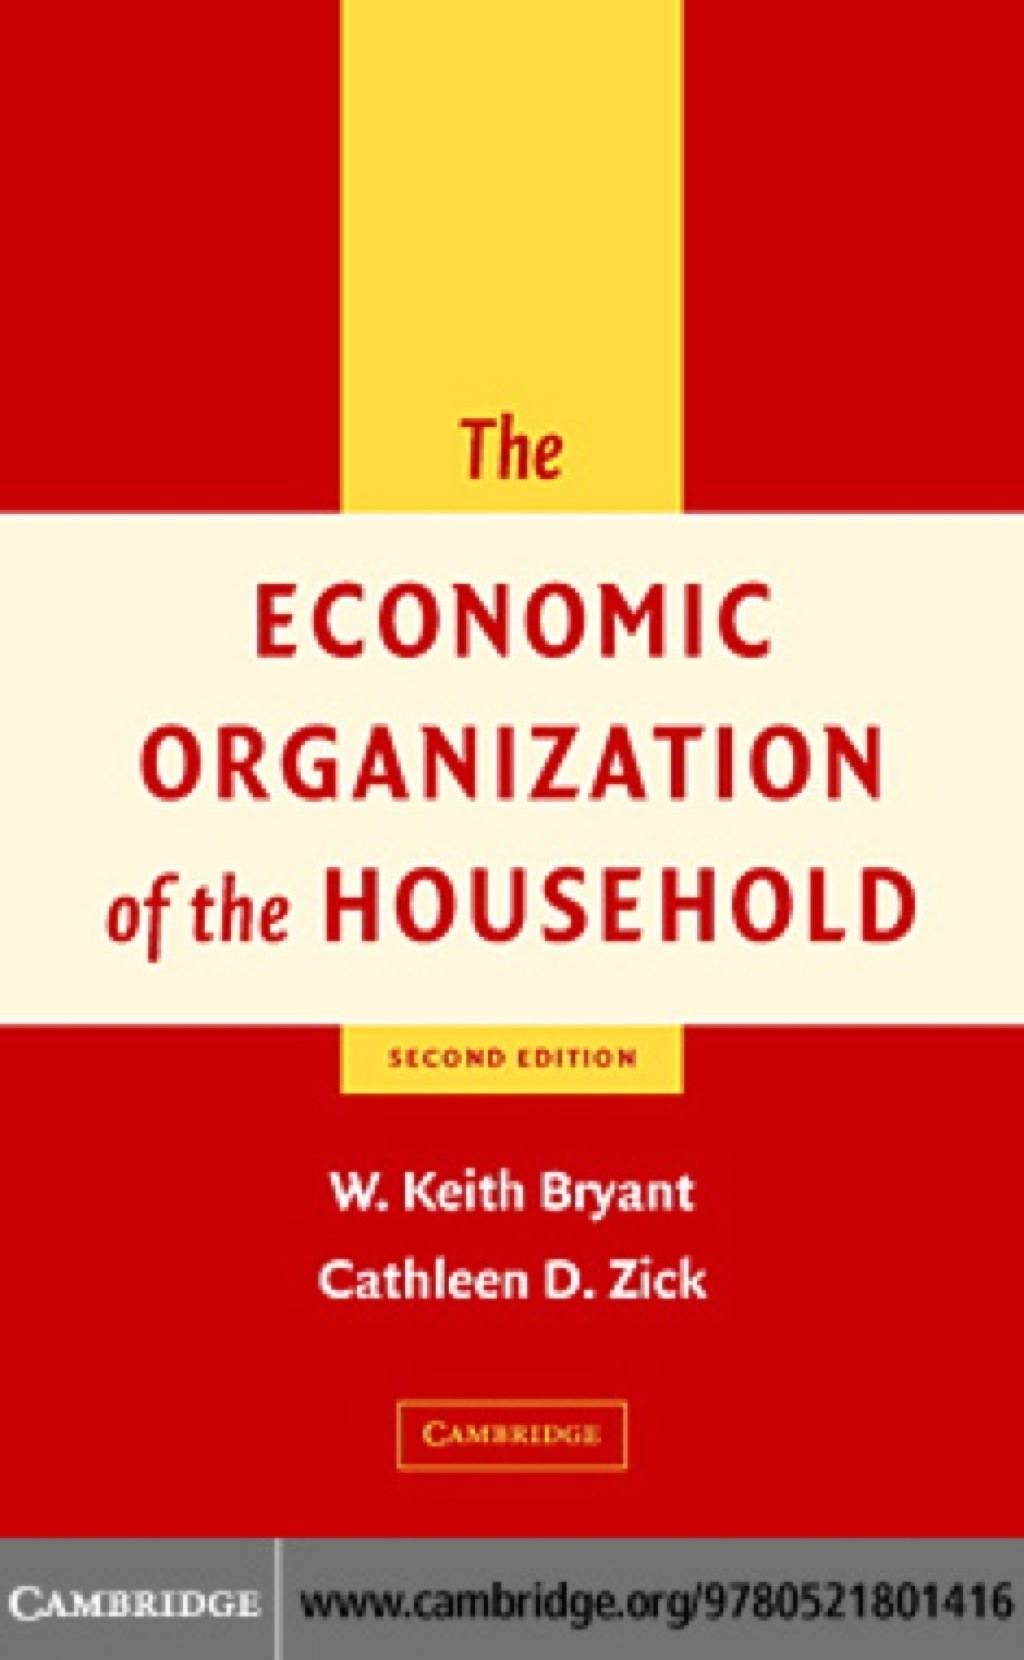 The Economic Organization of the Household - 2nd Edition (eBook)